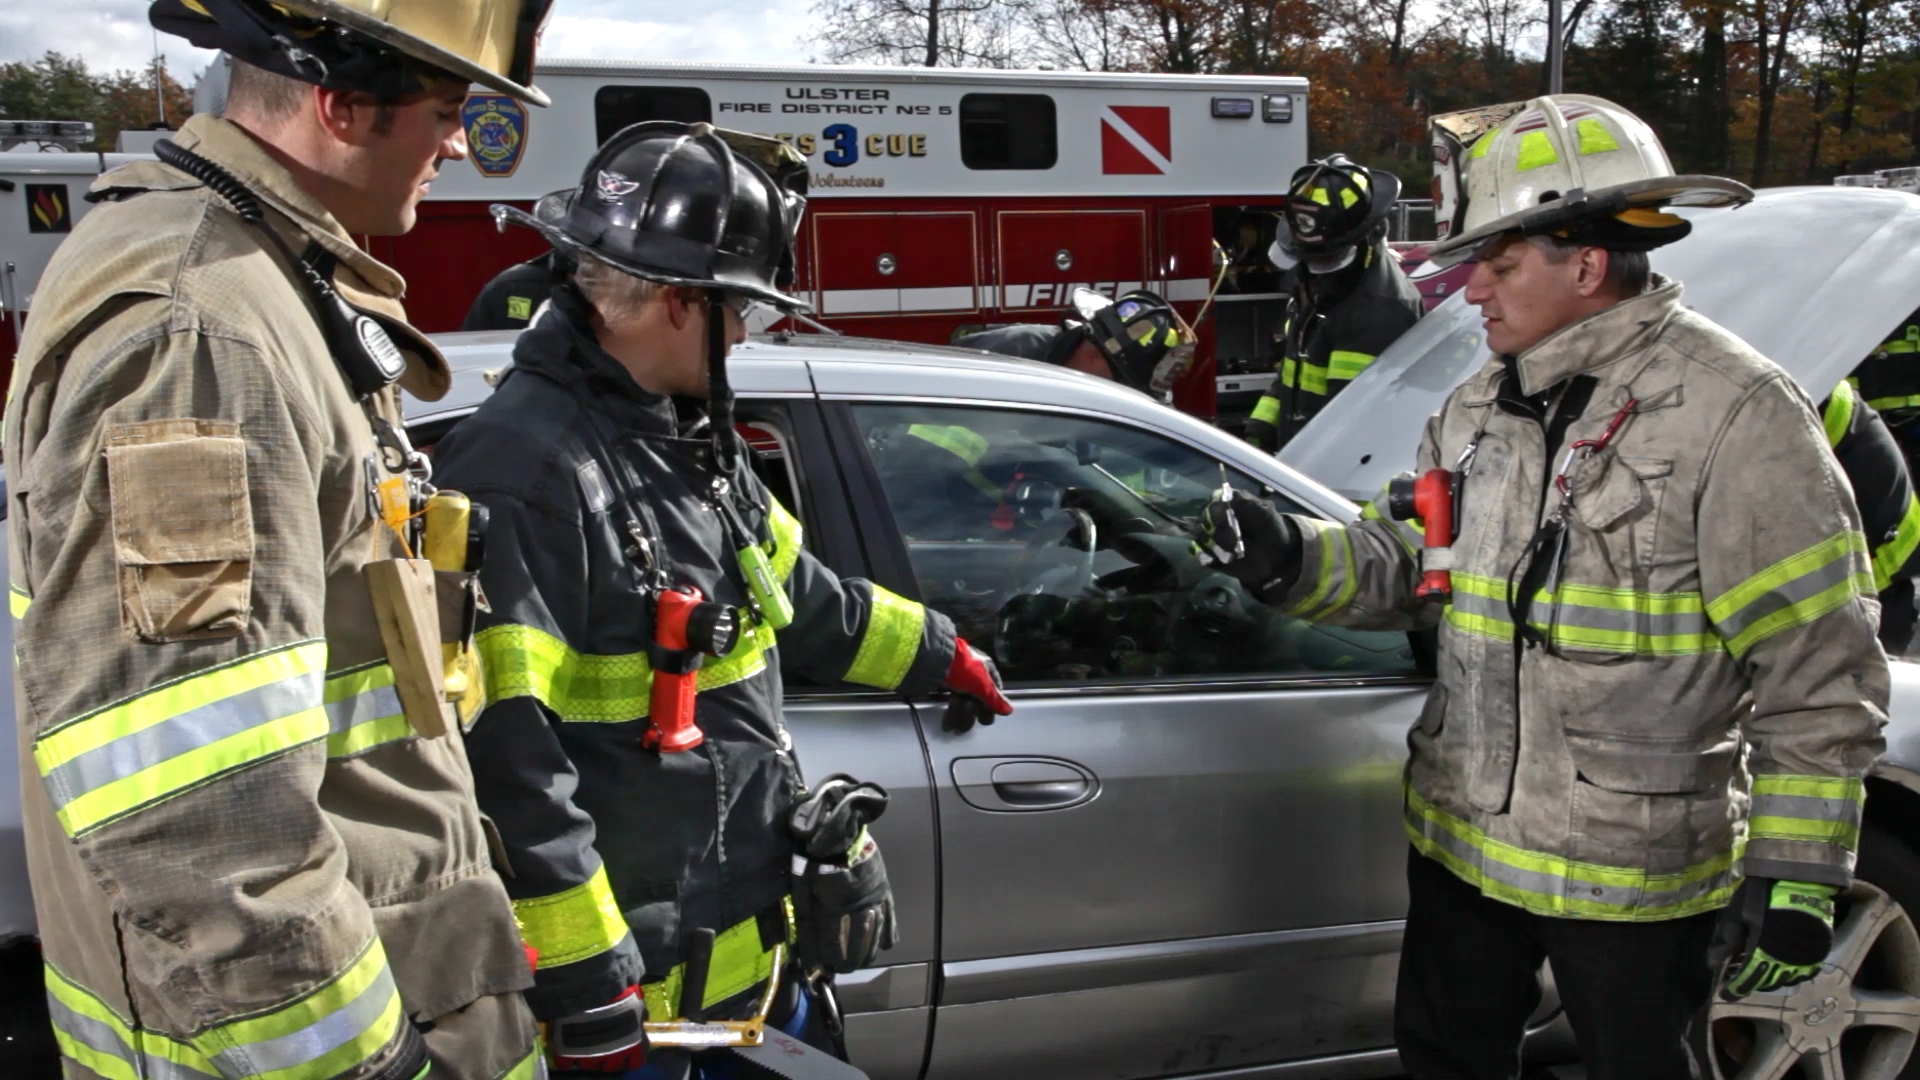 RIDE WITH US - Rick takes part in a vehicle extrication drill with Ulster Hose Co. 5